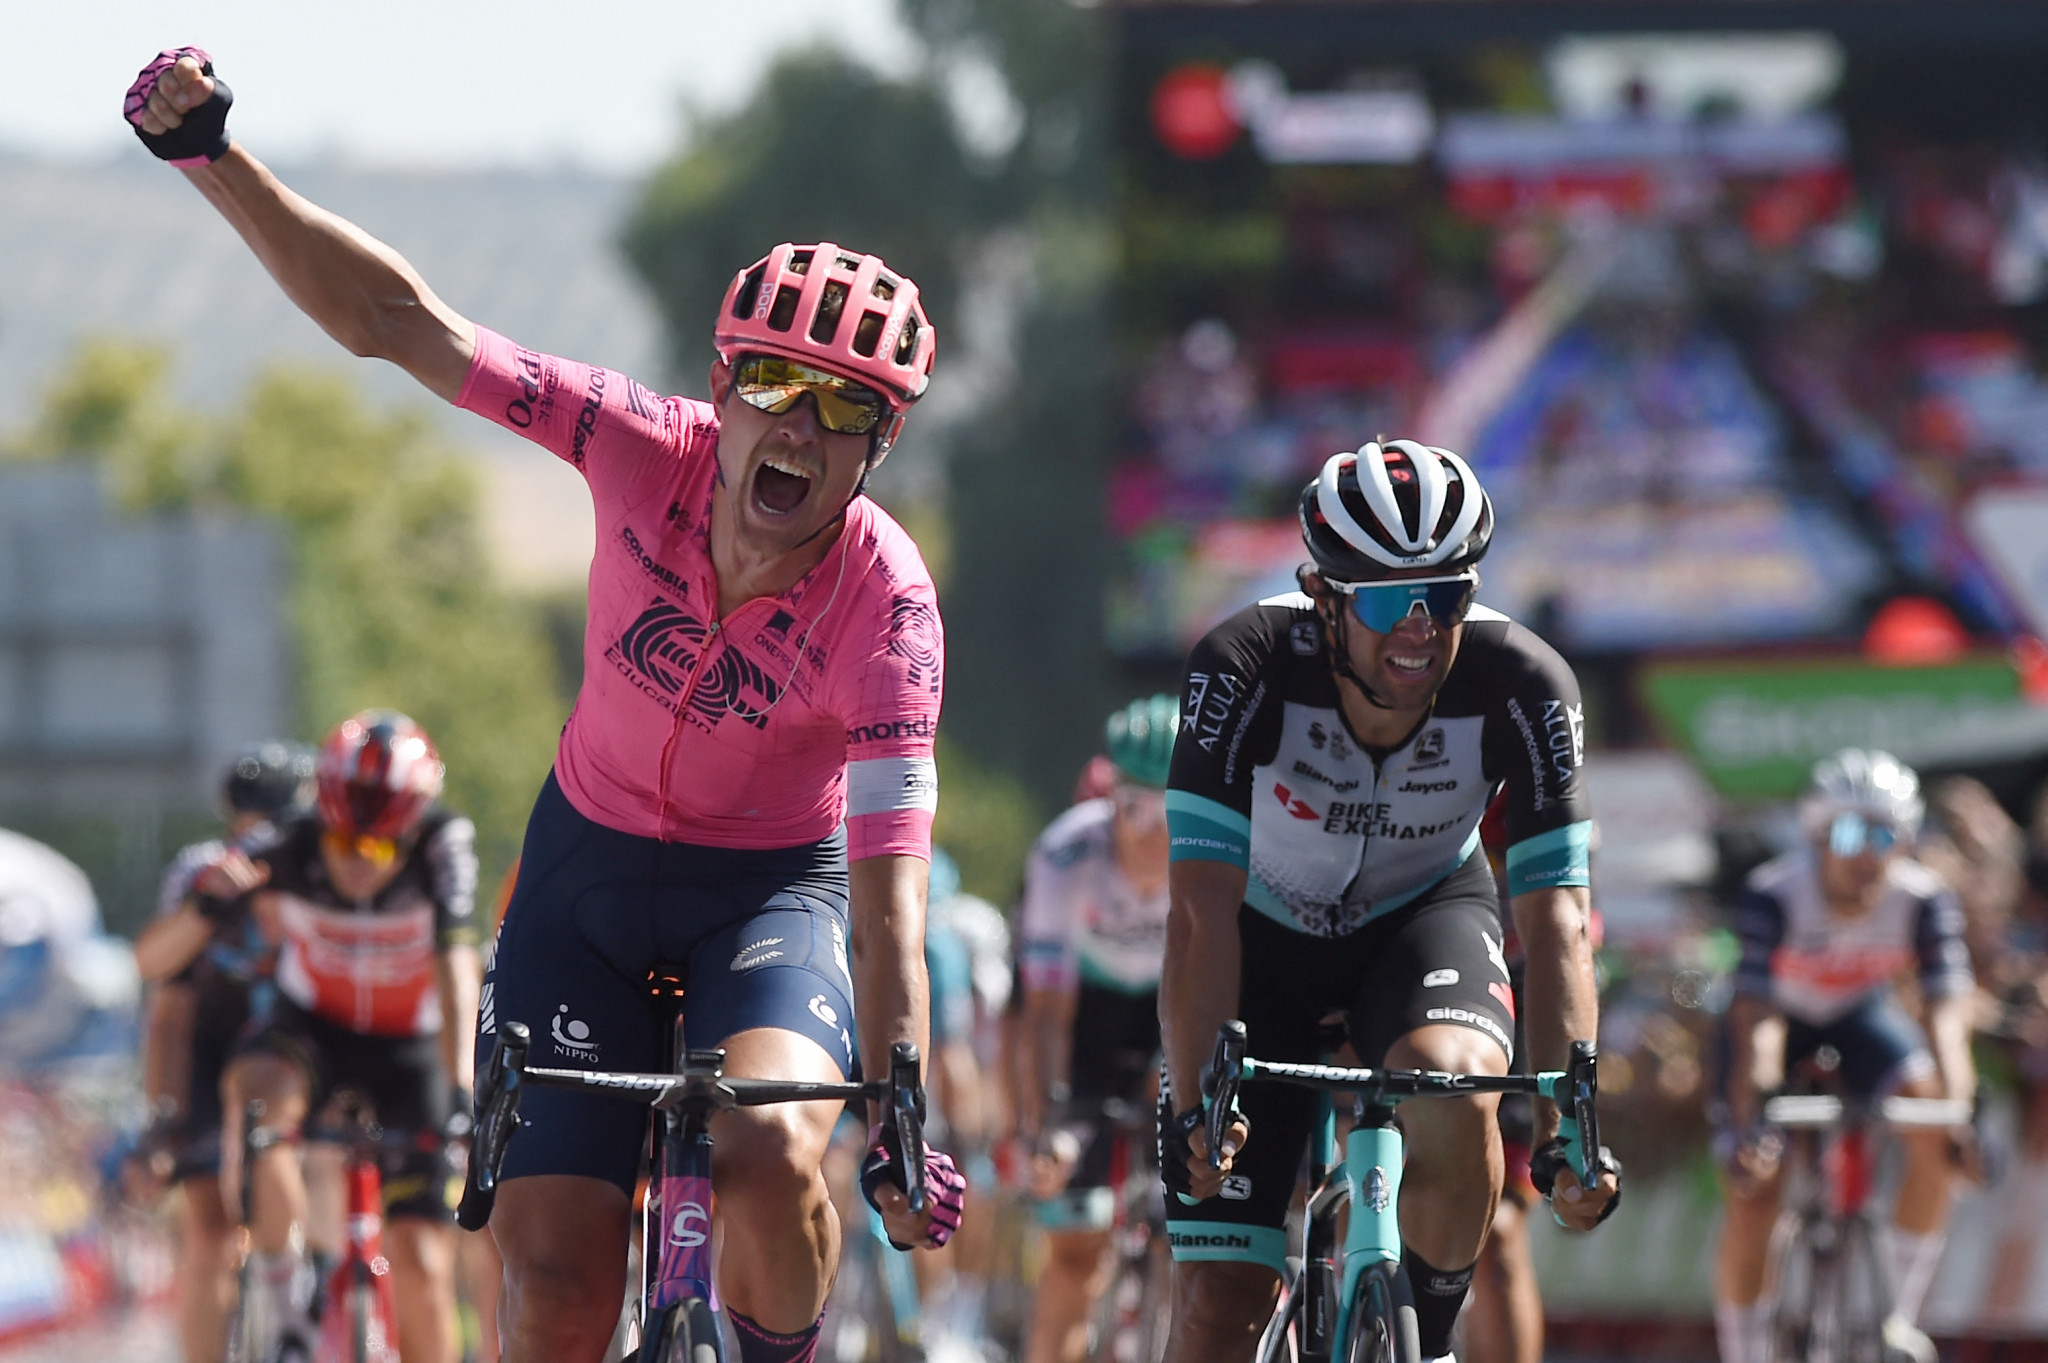 Cort wins second stage at 2021 Vuelta as Eiking retains red jersey and Roglič survives crash scare